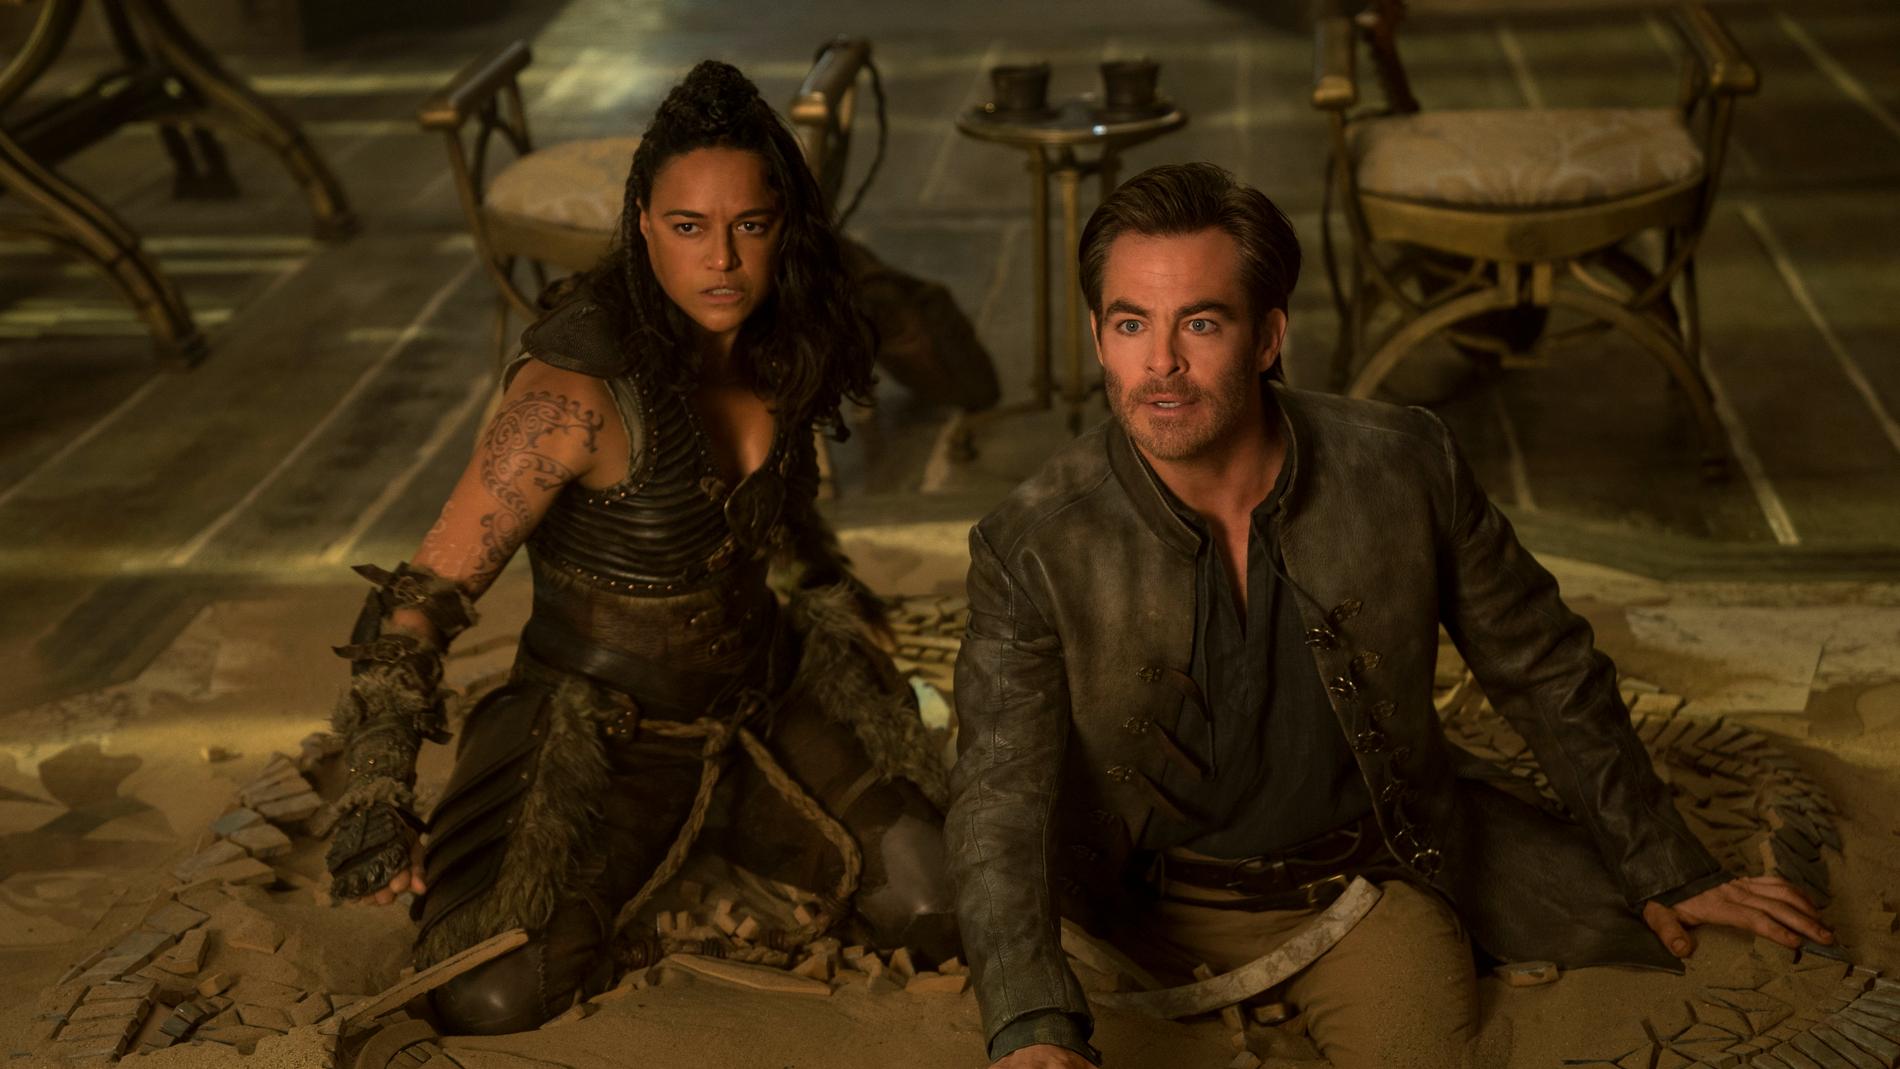 Michelle Rodriguez och Chris Pine i "Dungeons & dragons: honor among thieves". Pressbild.